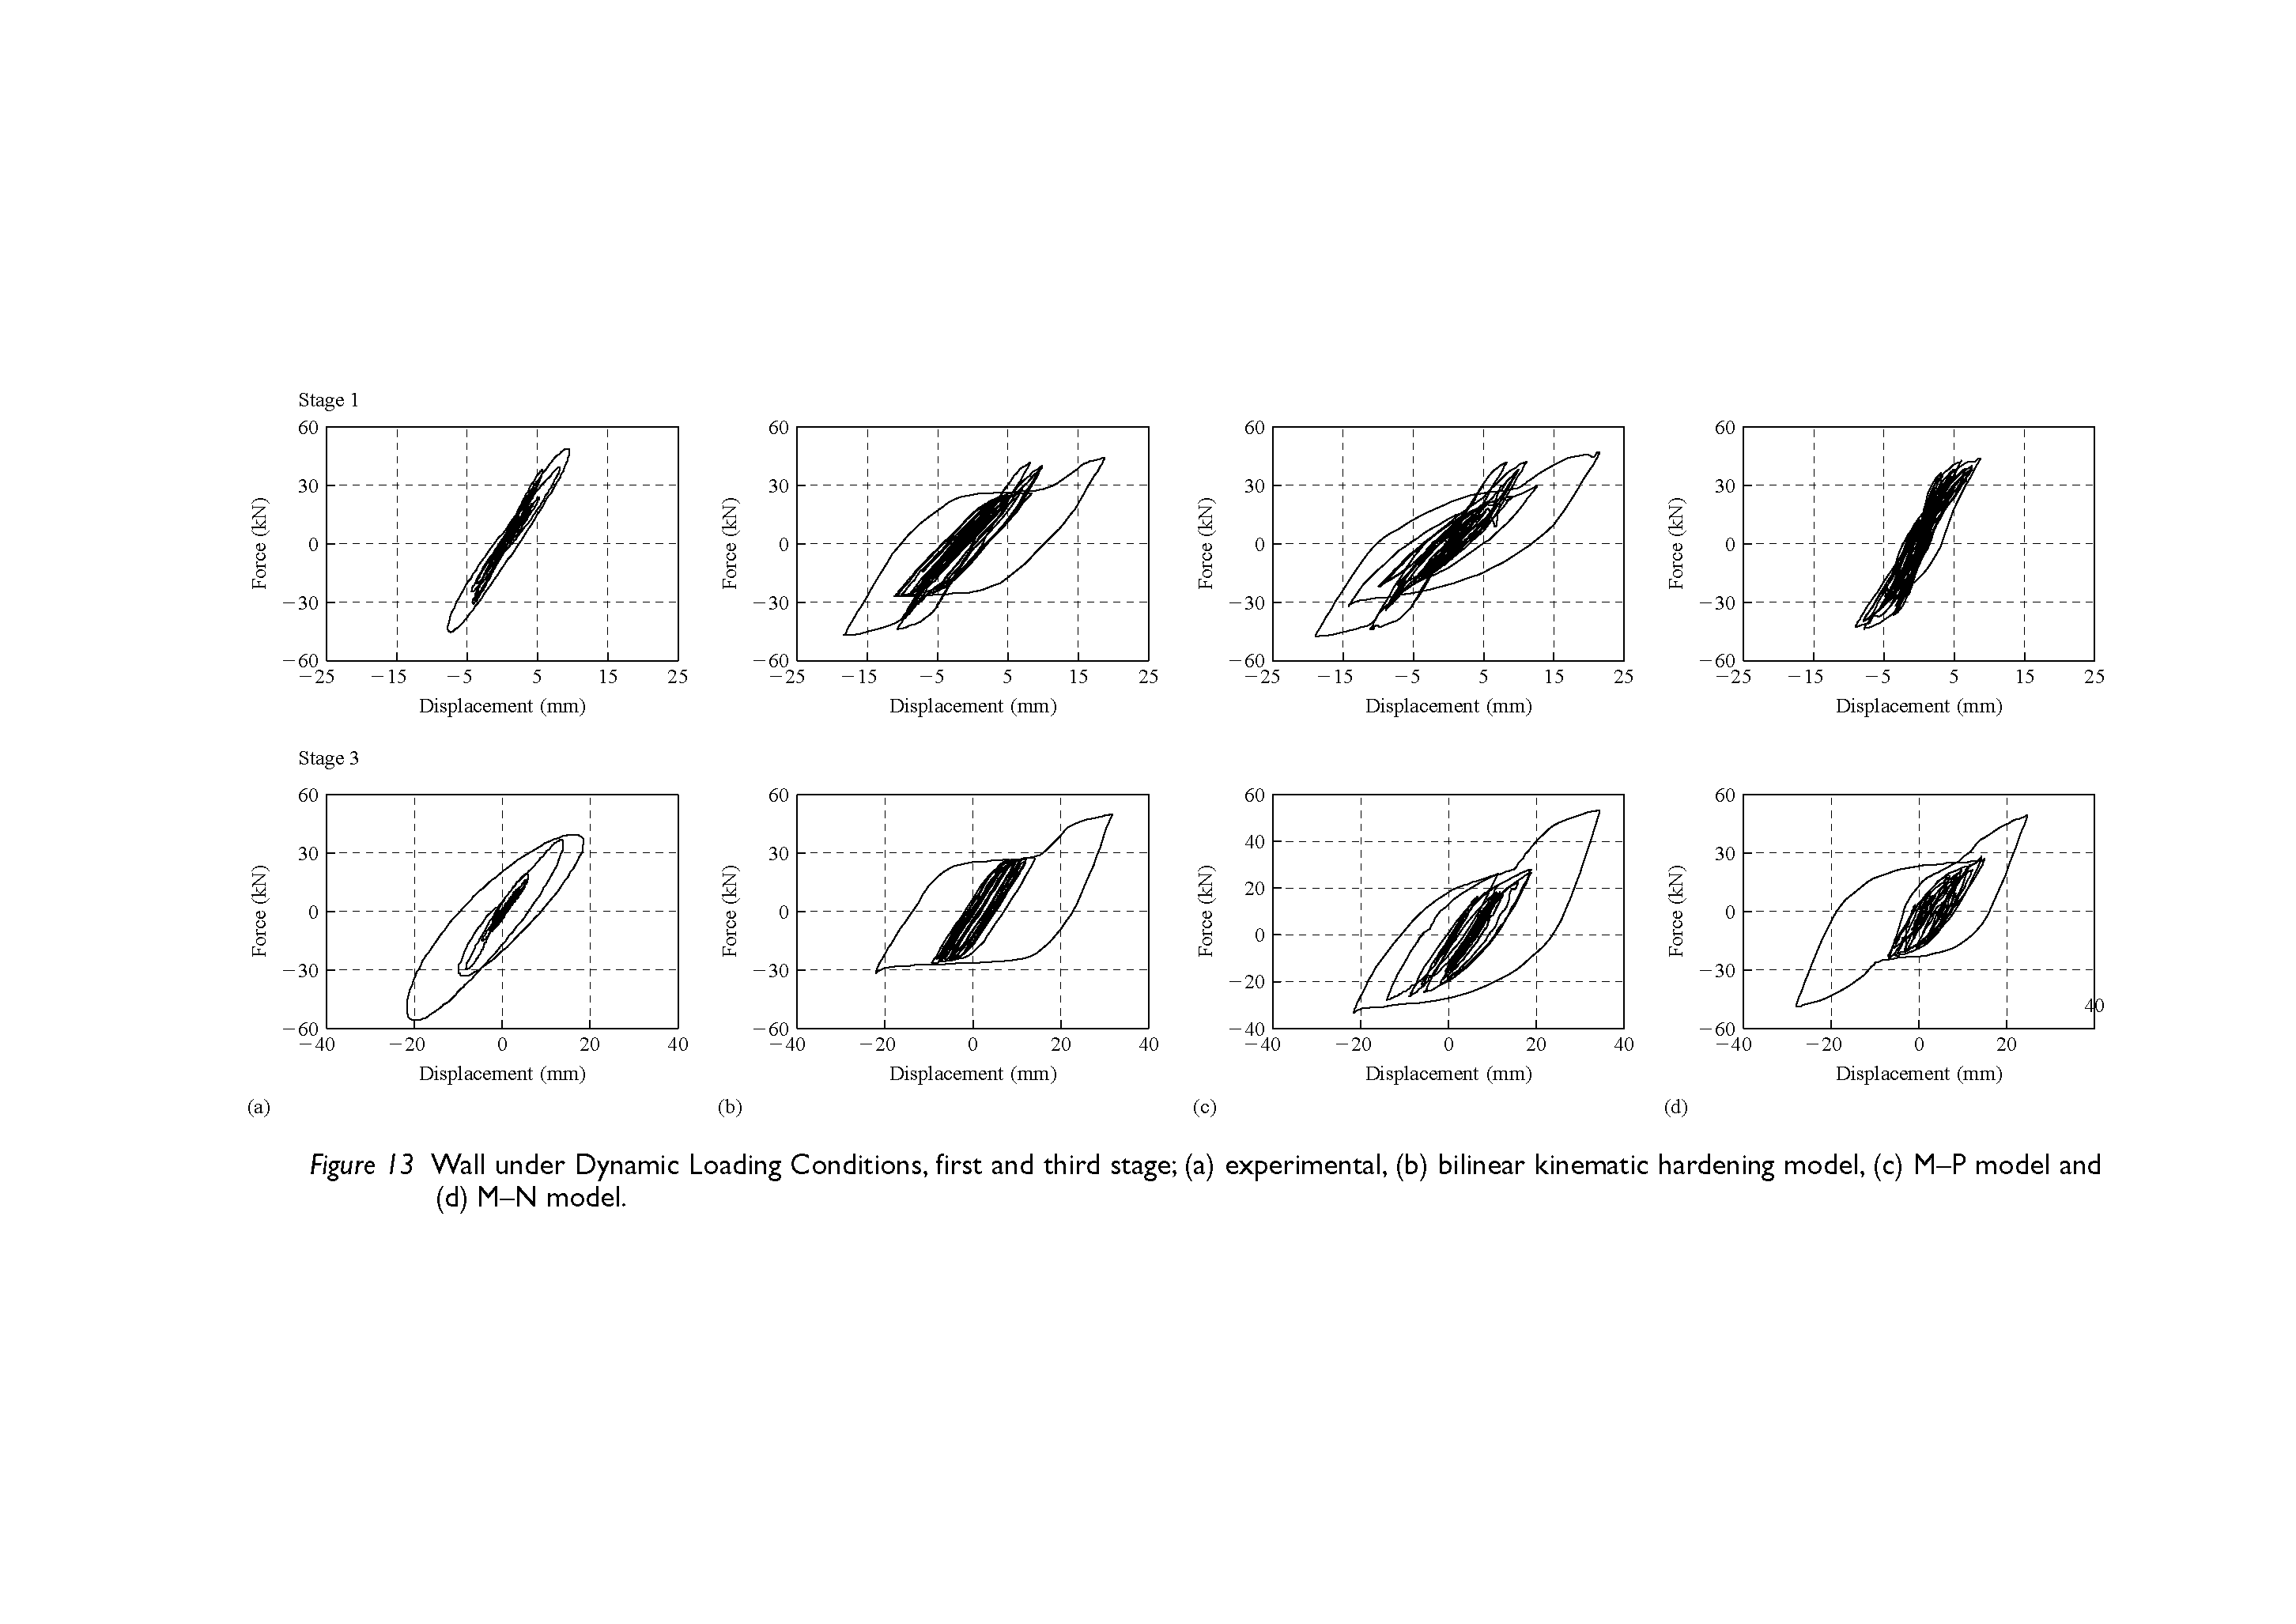 Figure 13 Wall under Dynamic Loading Conditions, first and third stage (a) experimental, (b) bilinear kinematic hardening model, (c) M-P model and (d) M-N model.